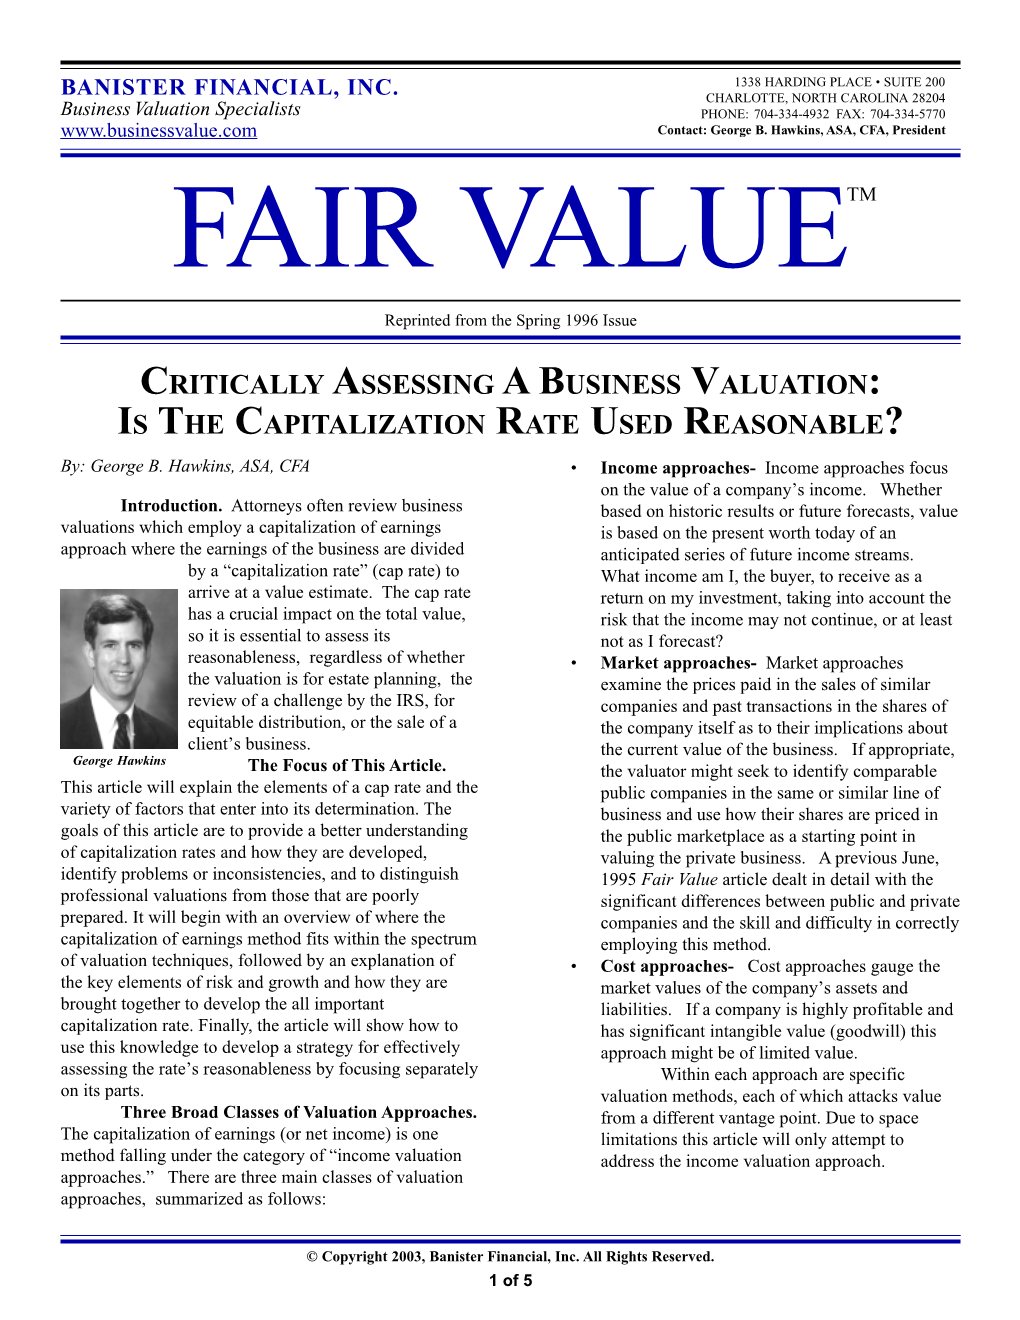 CRITICALLY ASSESSING a BUSINESS VALUATION: IS the CAPITALIZATION RATE USED REASONABLE? By: George B